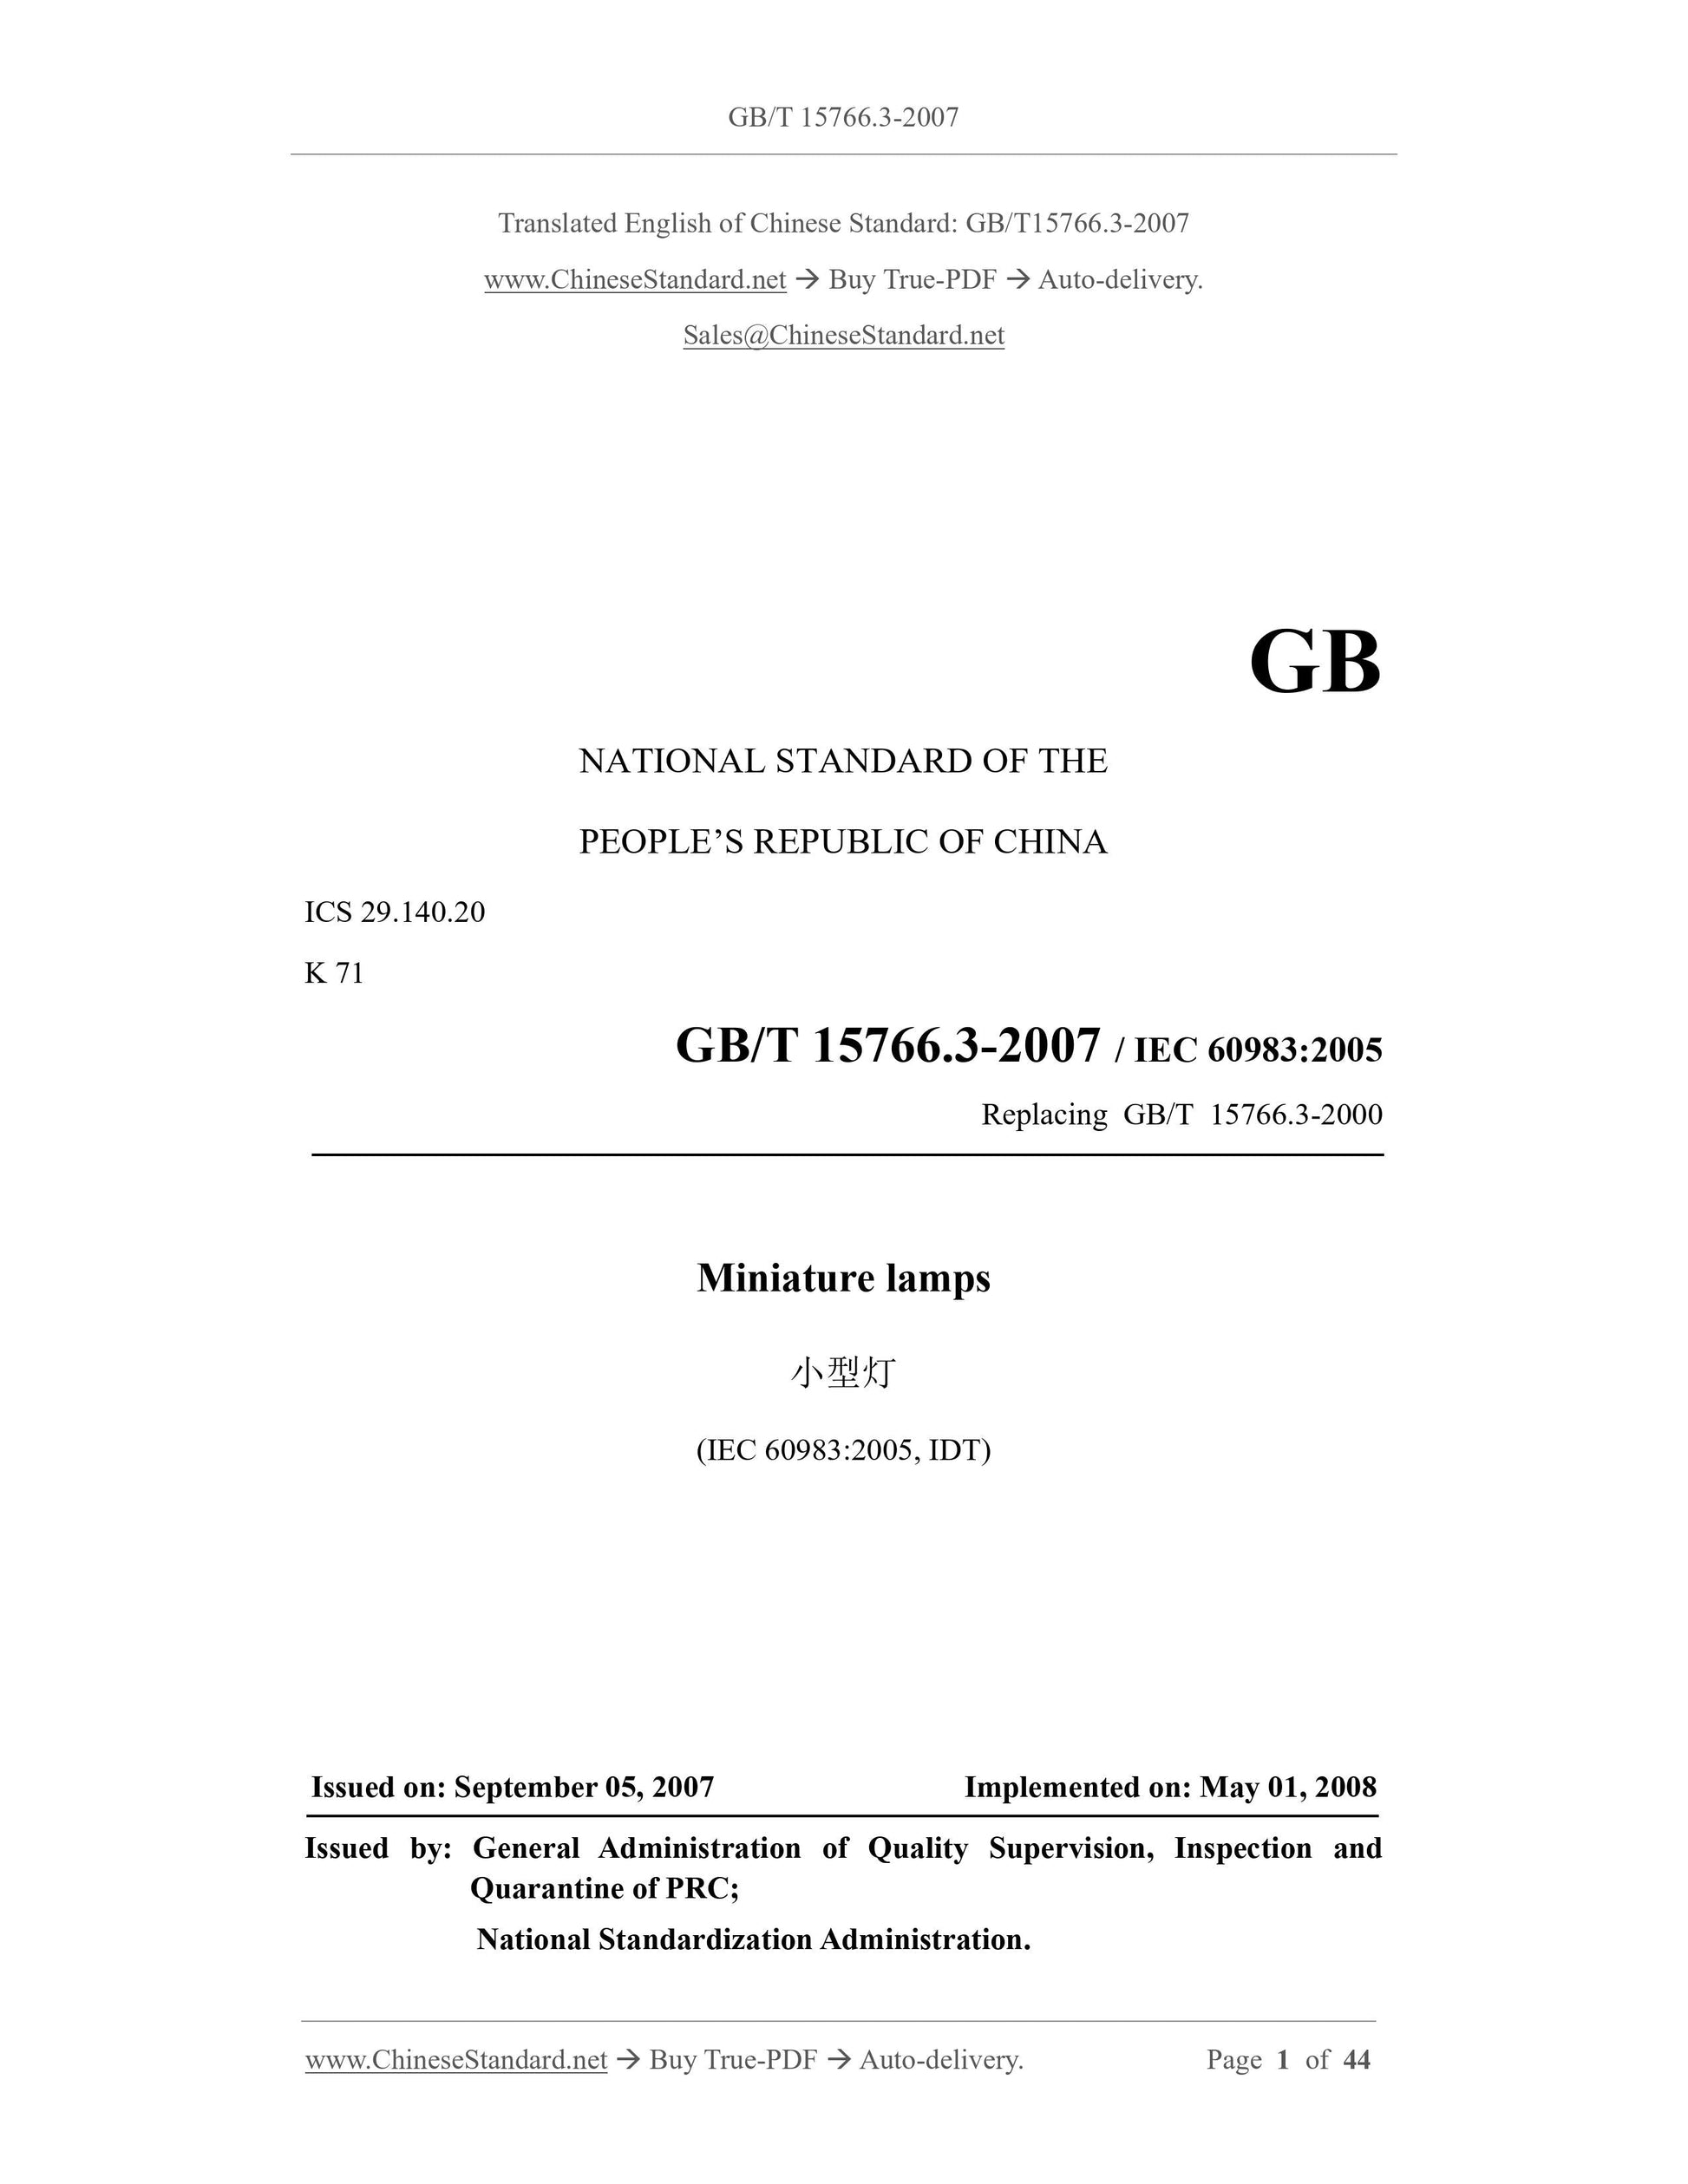 GB/T 15766.3-2007 Page 1